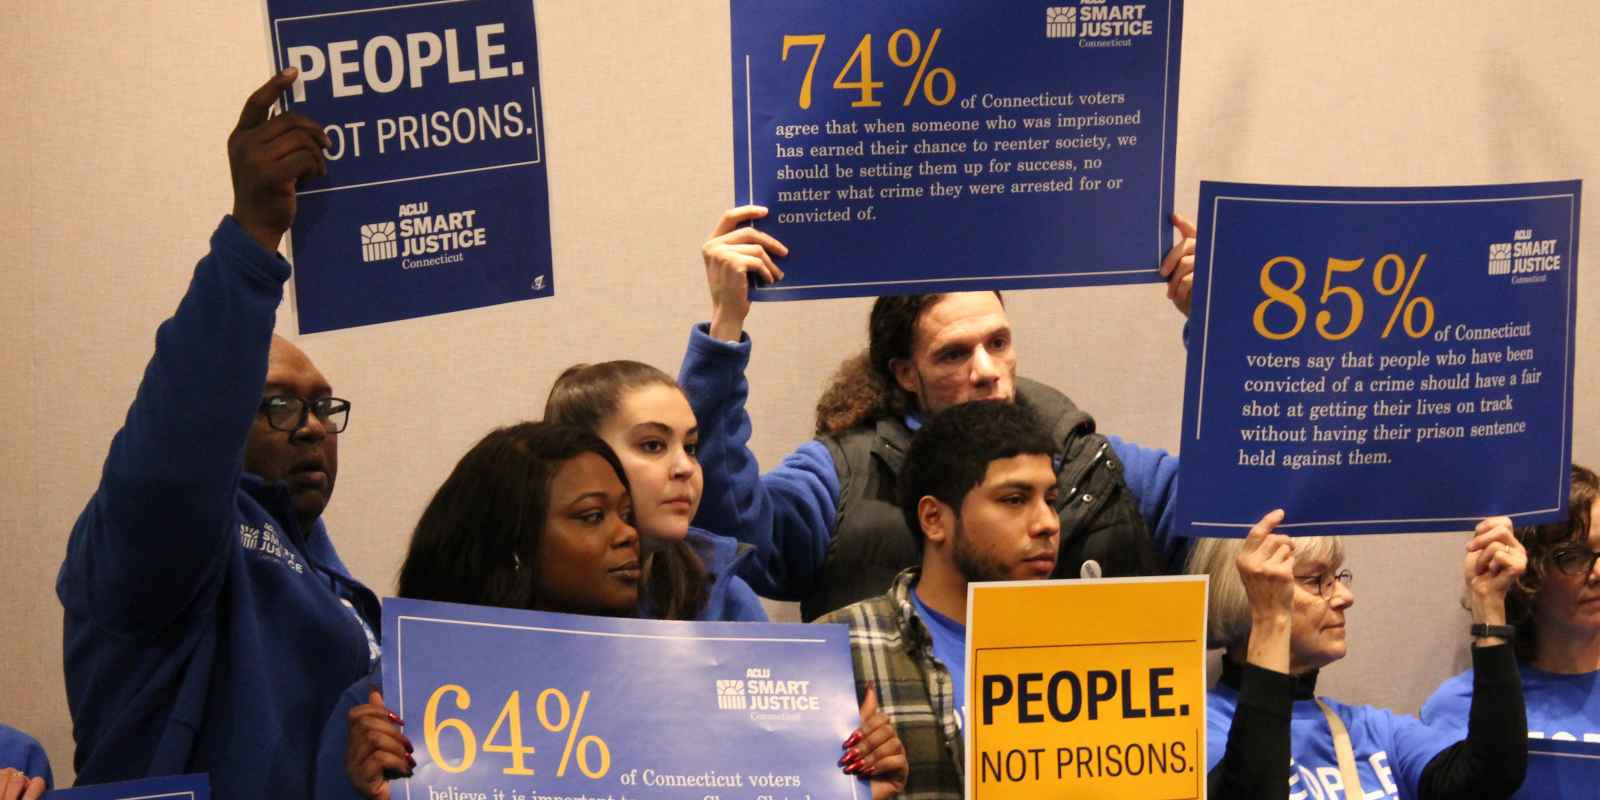 ACLU-CT Smart Justice leaders stand with "people not prisons" posters at a Connecticut Clean Slate pres conference